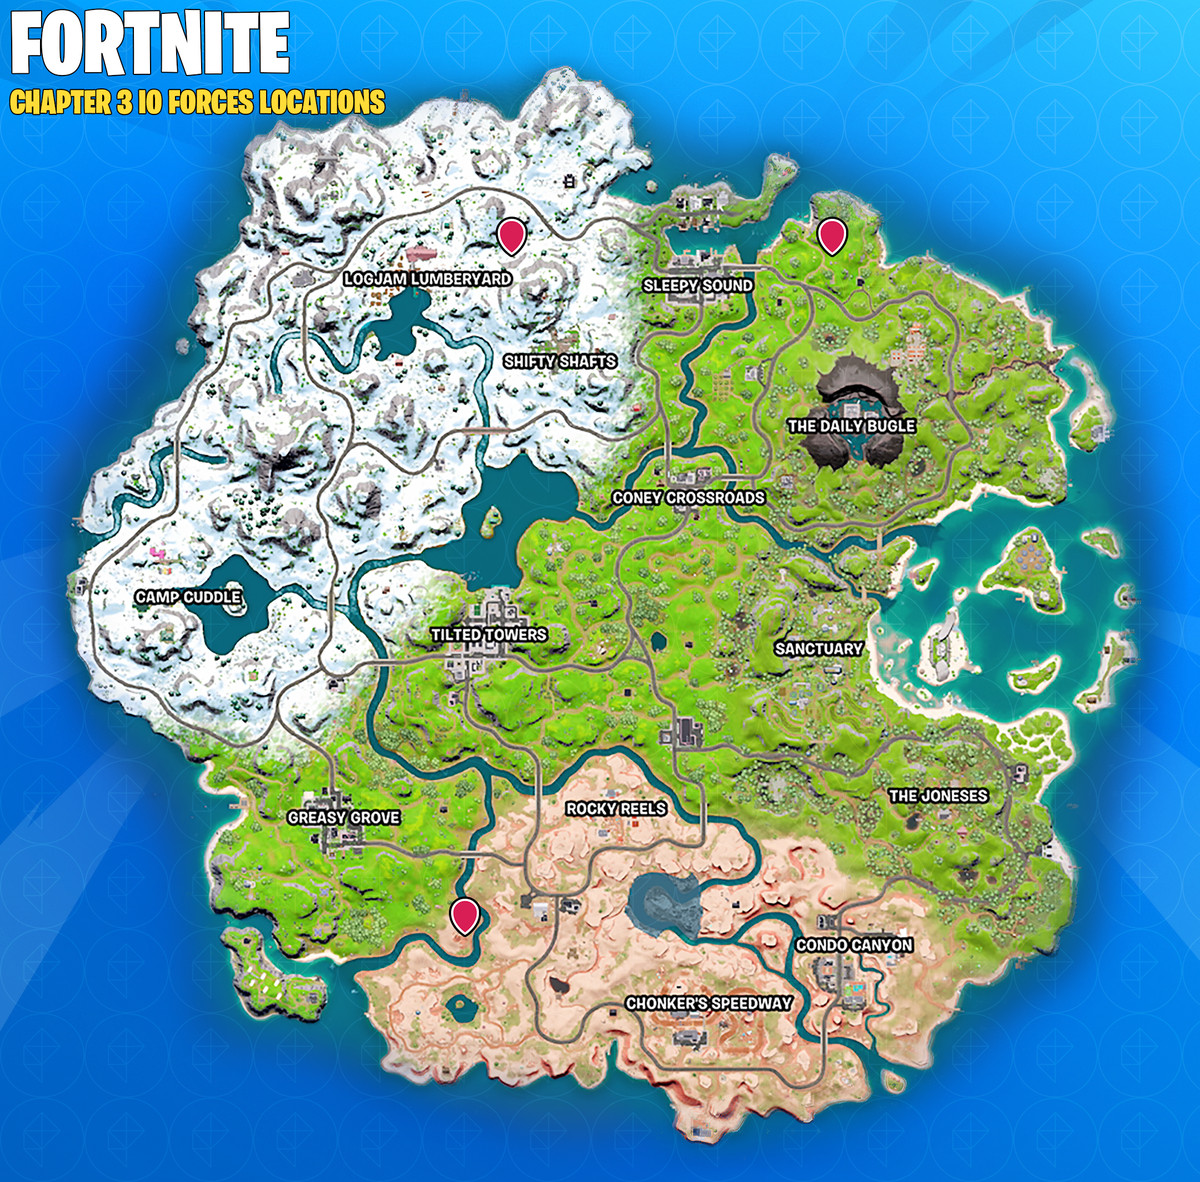 A Fortnite map showing IO guard locations